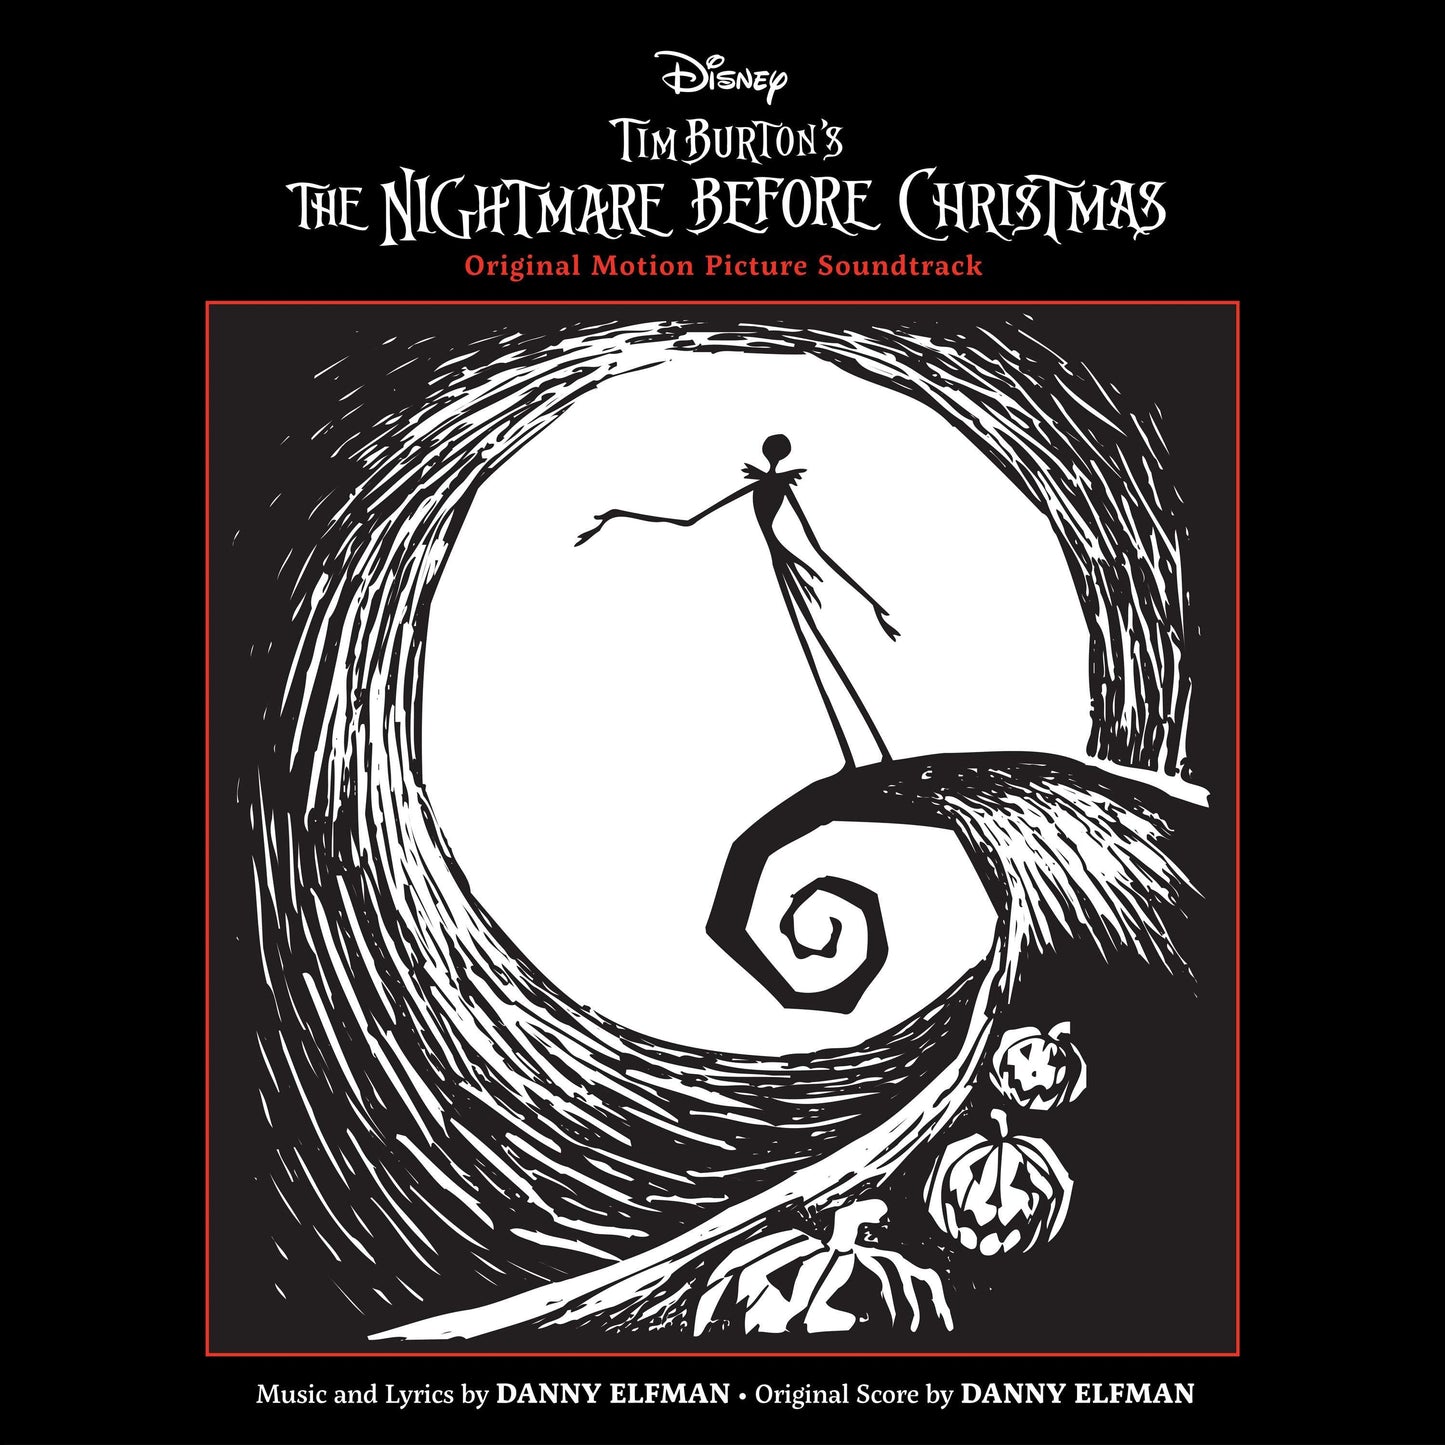 DAMAGED: V/A "The Nightmare Before Christmas (Original Motion Picture Soundtrack)" 2xLP (Zoetrope Picture Disc)